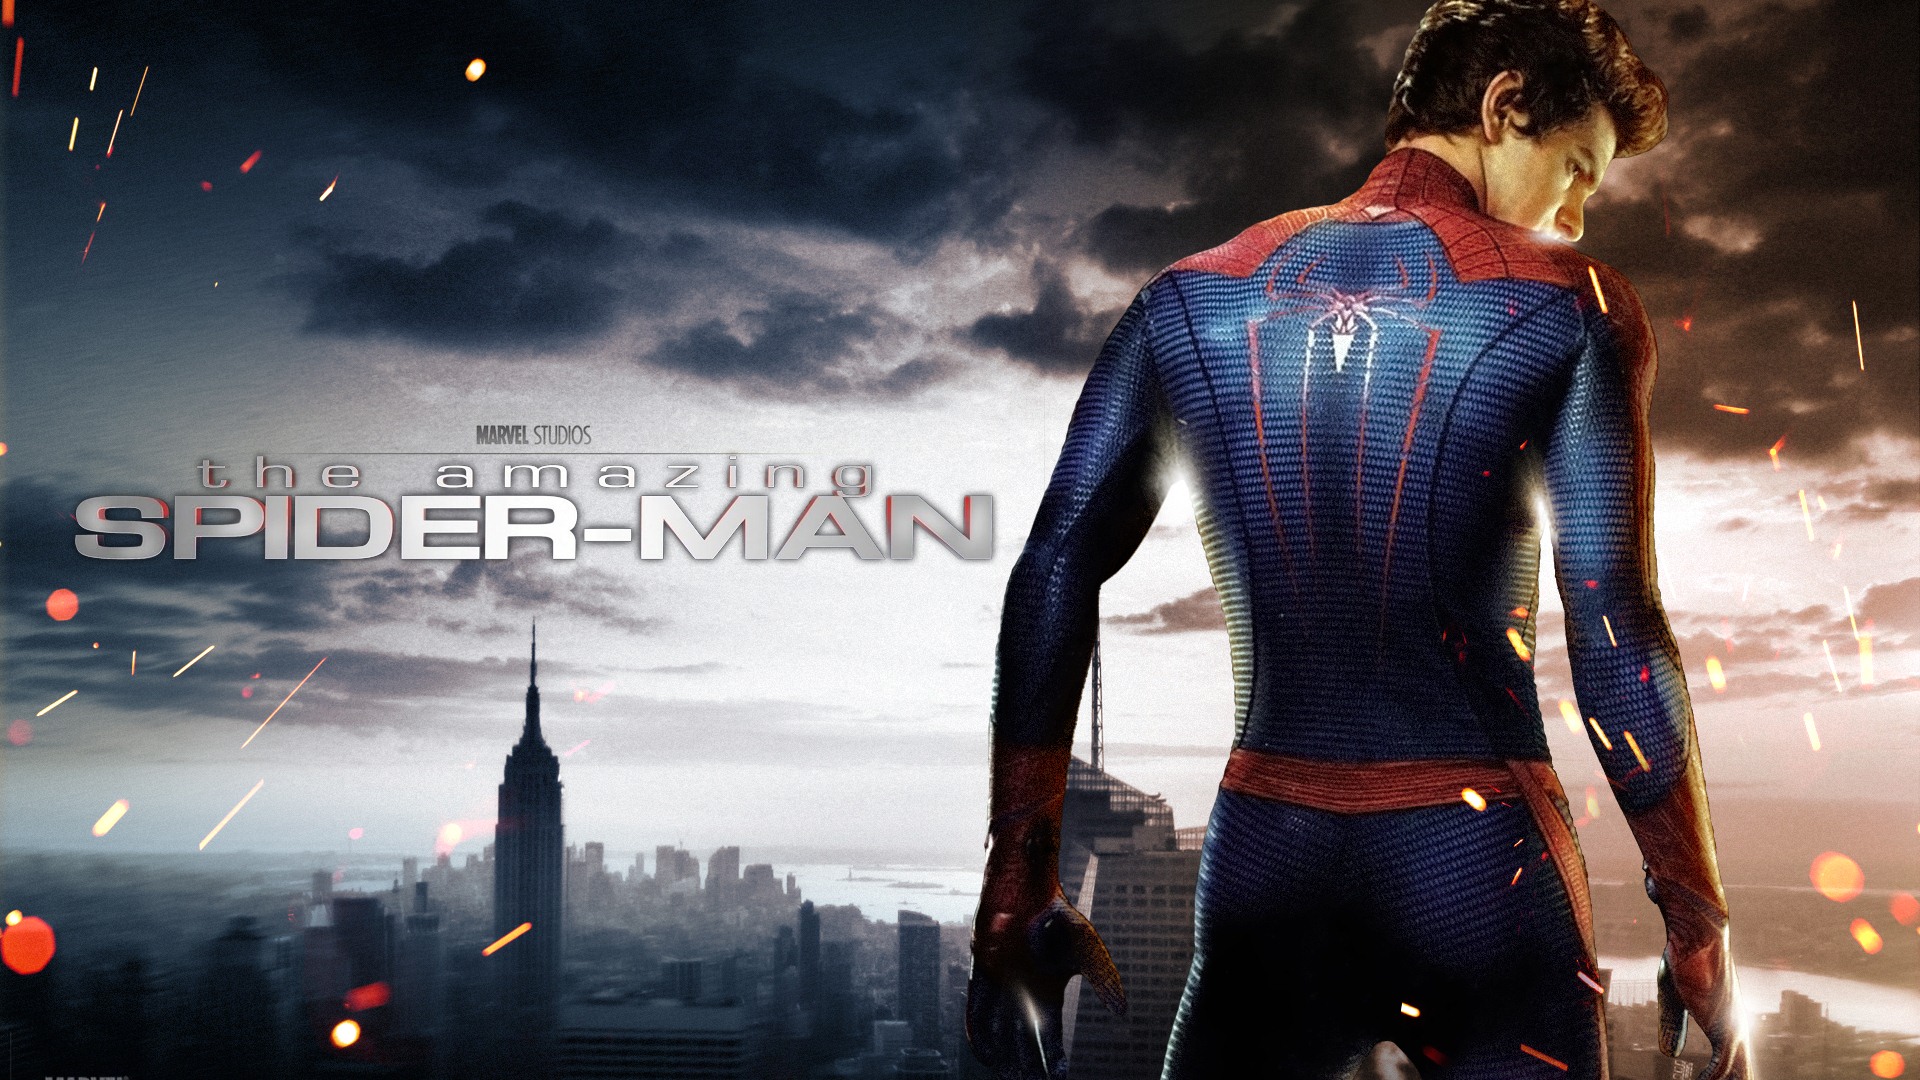 The Amazing Spider-Man 2012 wallpapers #1 - 1920x1080